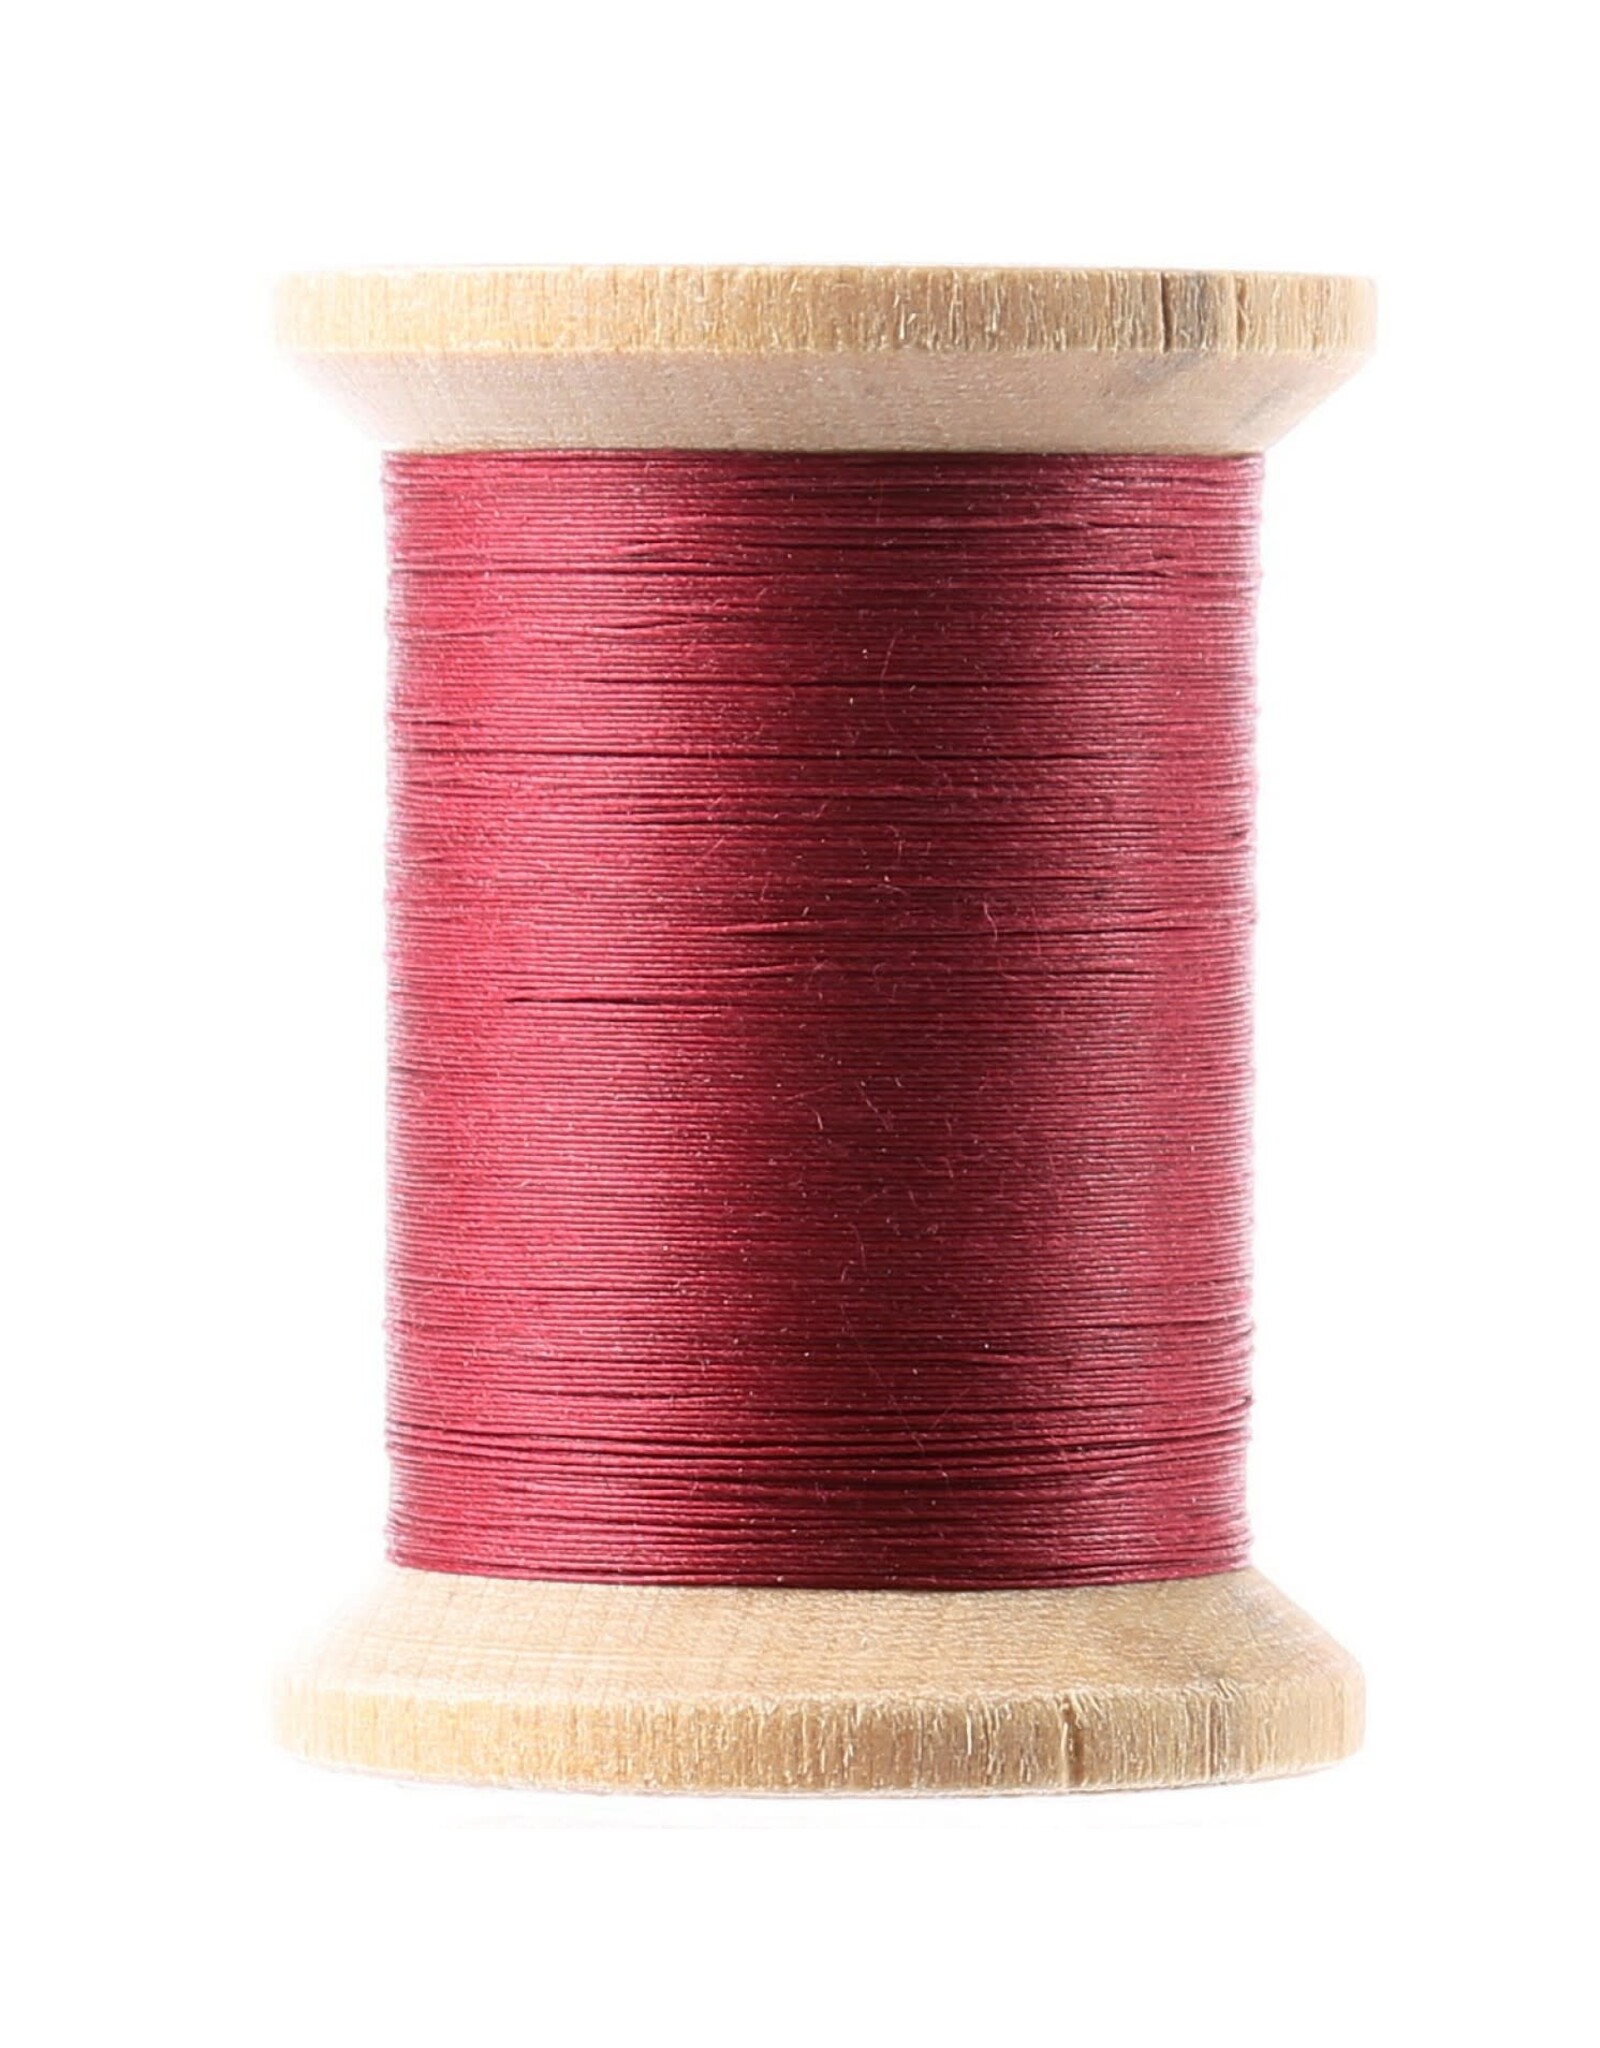 YLI ON ORDER-YLI Cotton Hand Quilting Thread, 021 Red, 40wt, 3 ply, 500 yd spool